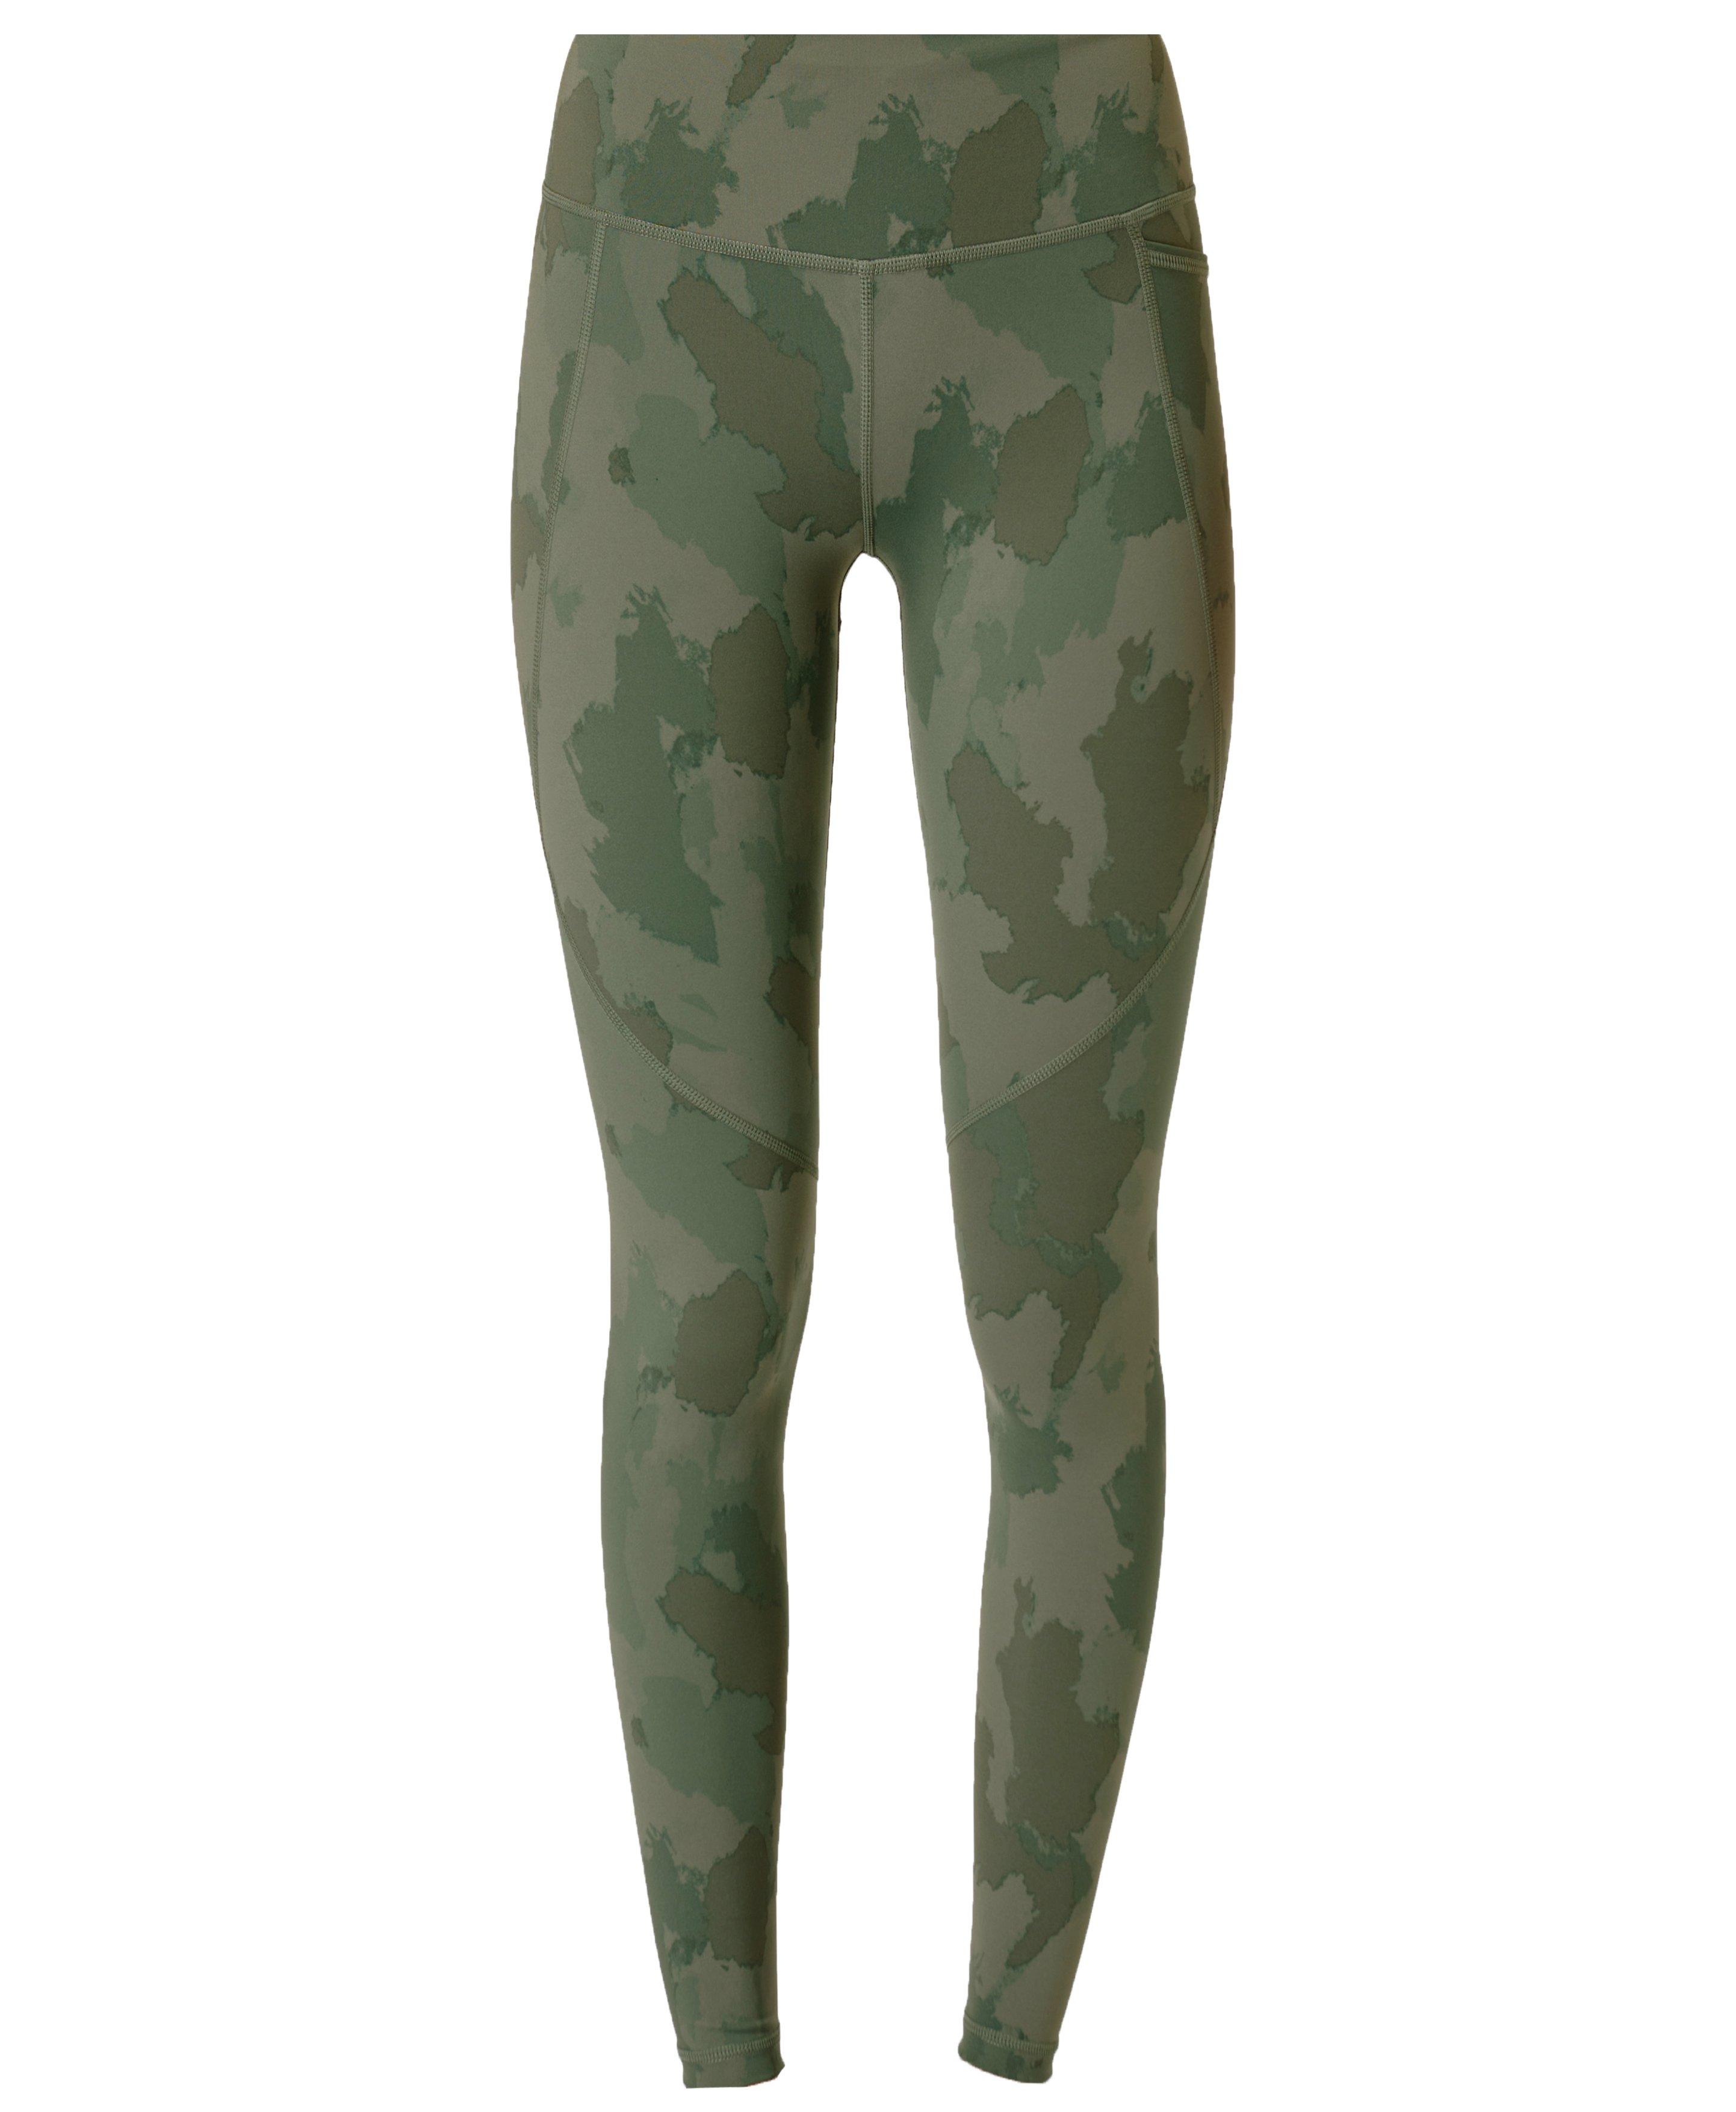 Brown And Green Camo Leggings - Free Shipping - Projects817